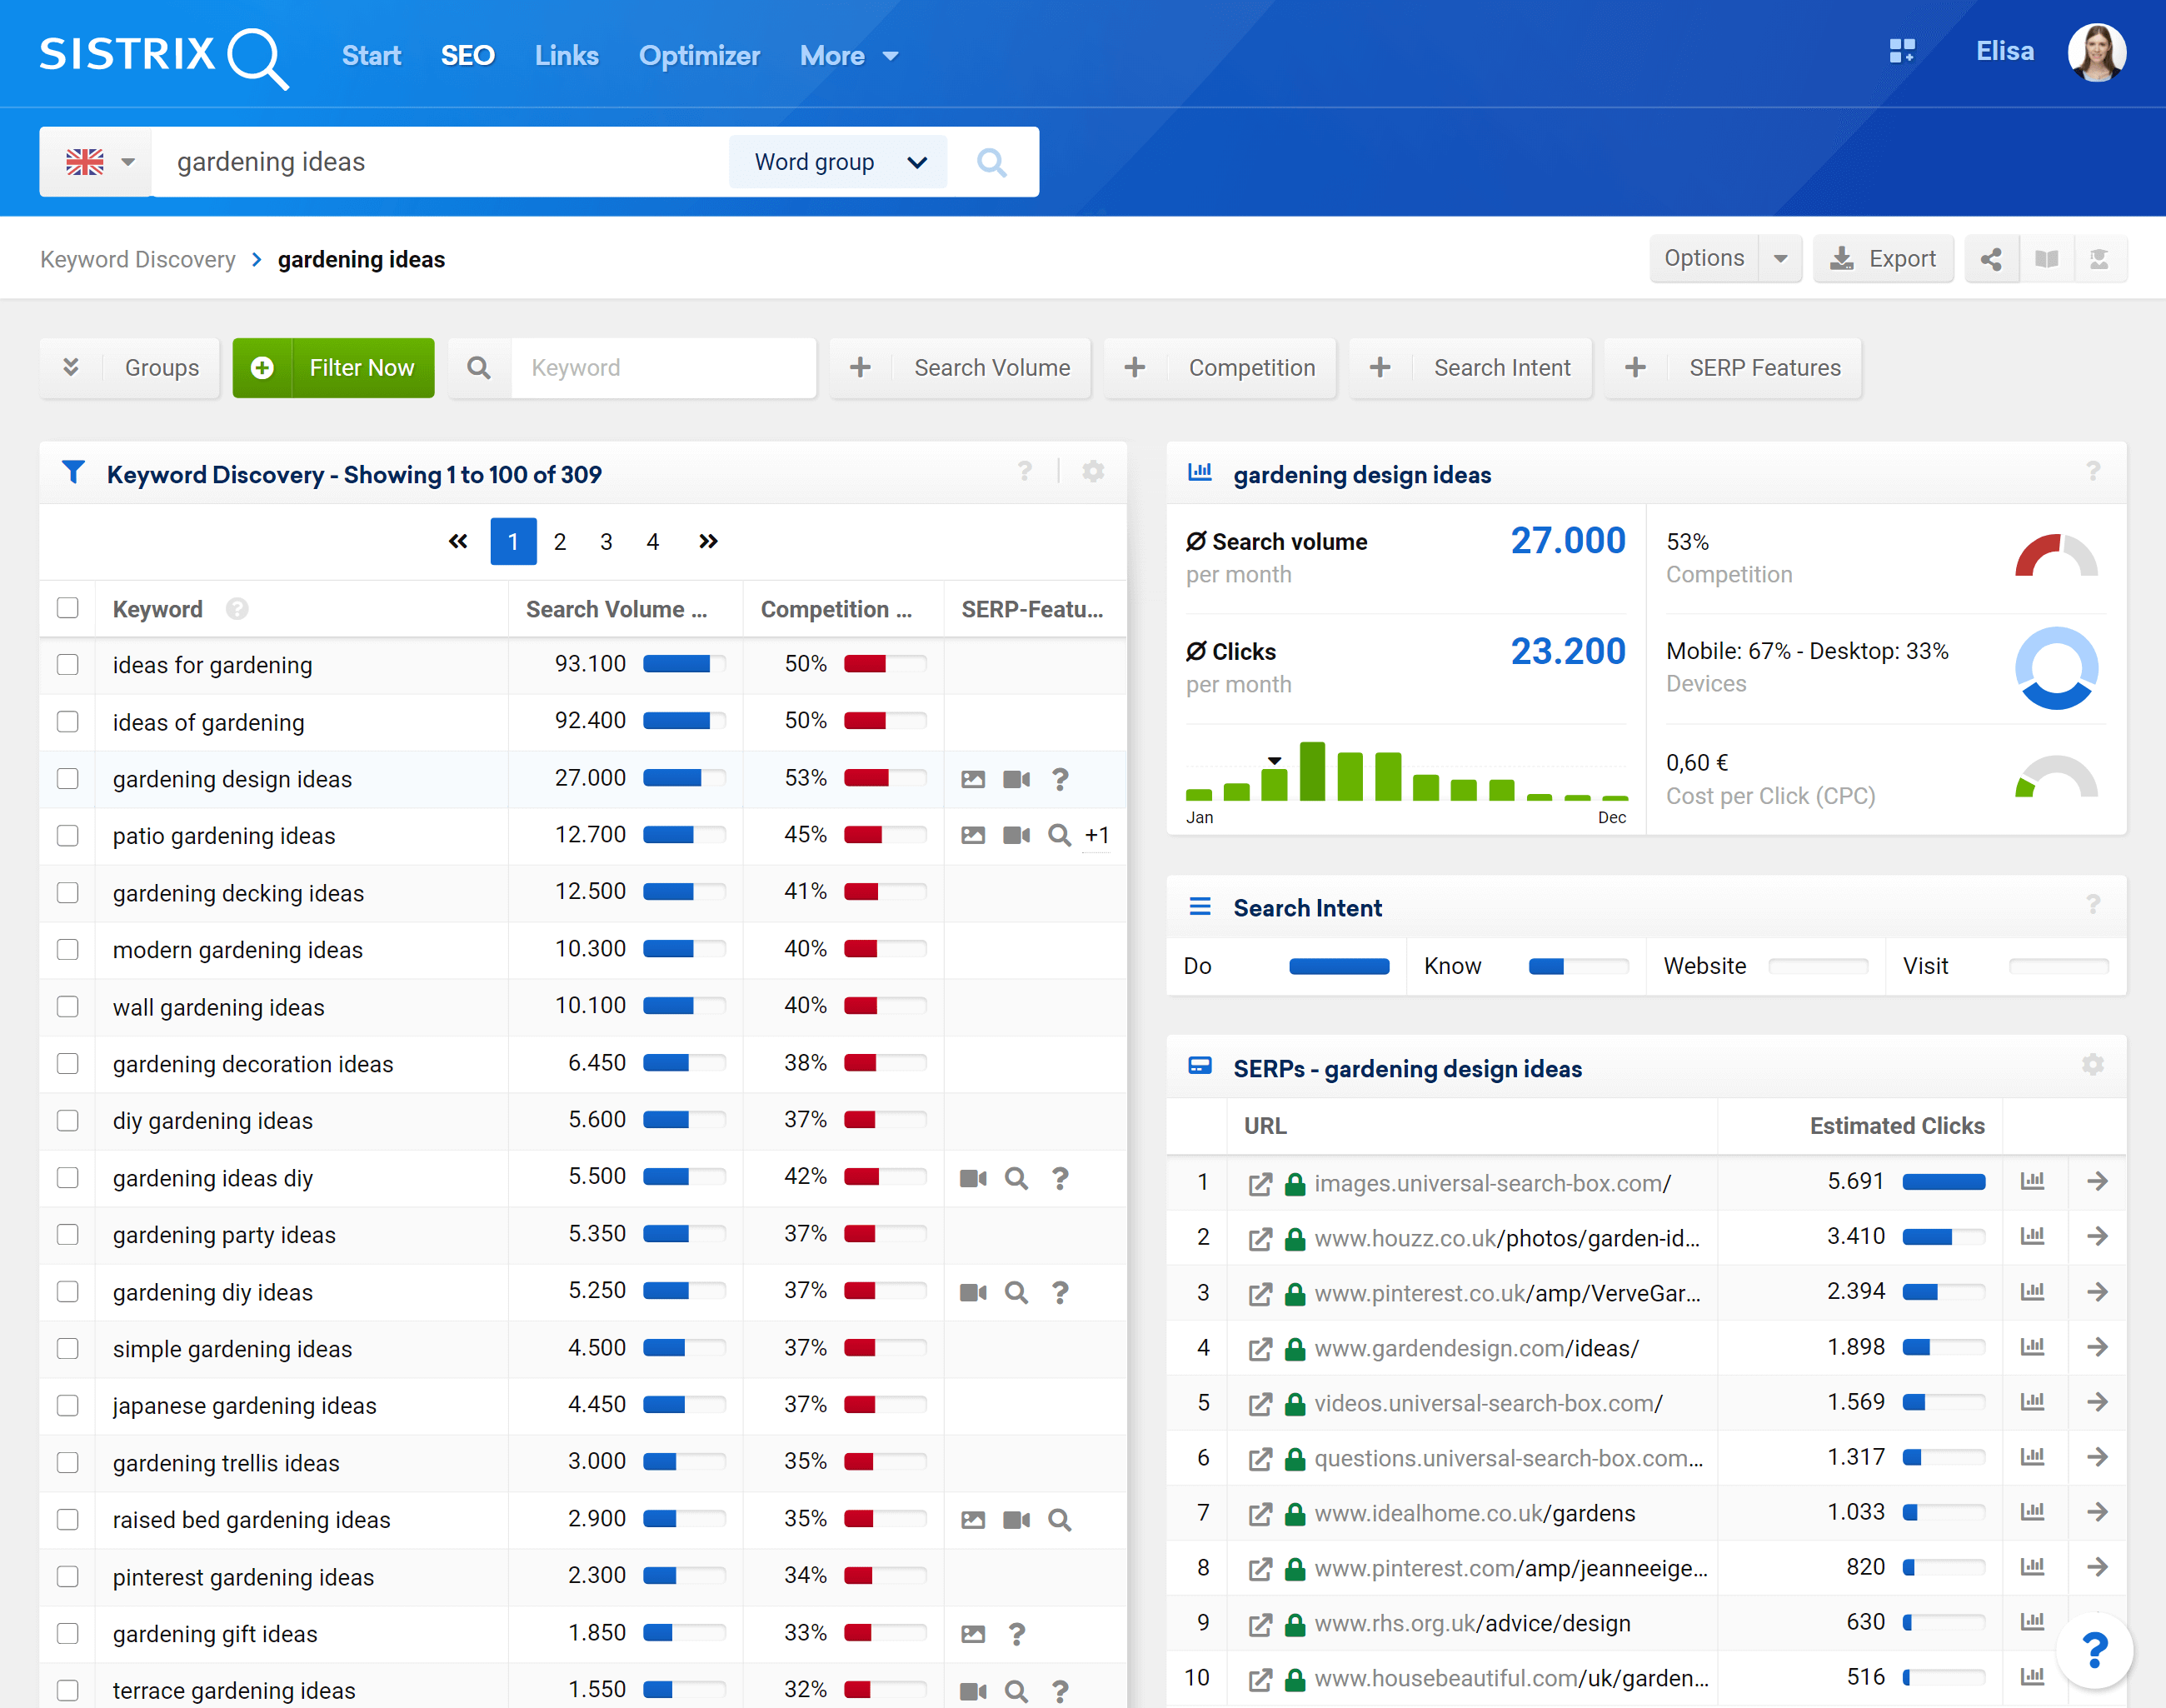 The interface of the Keyword Discovery tool